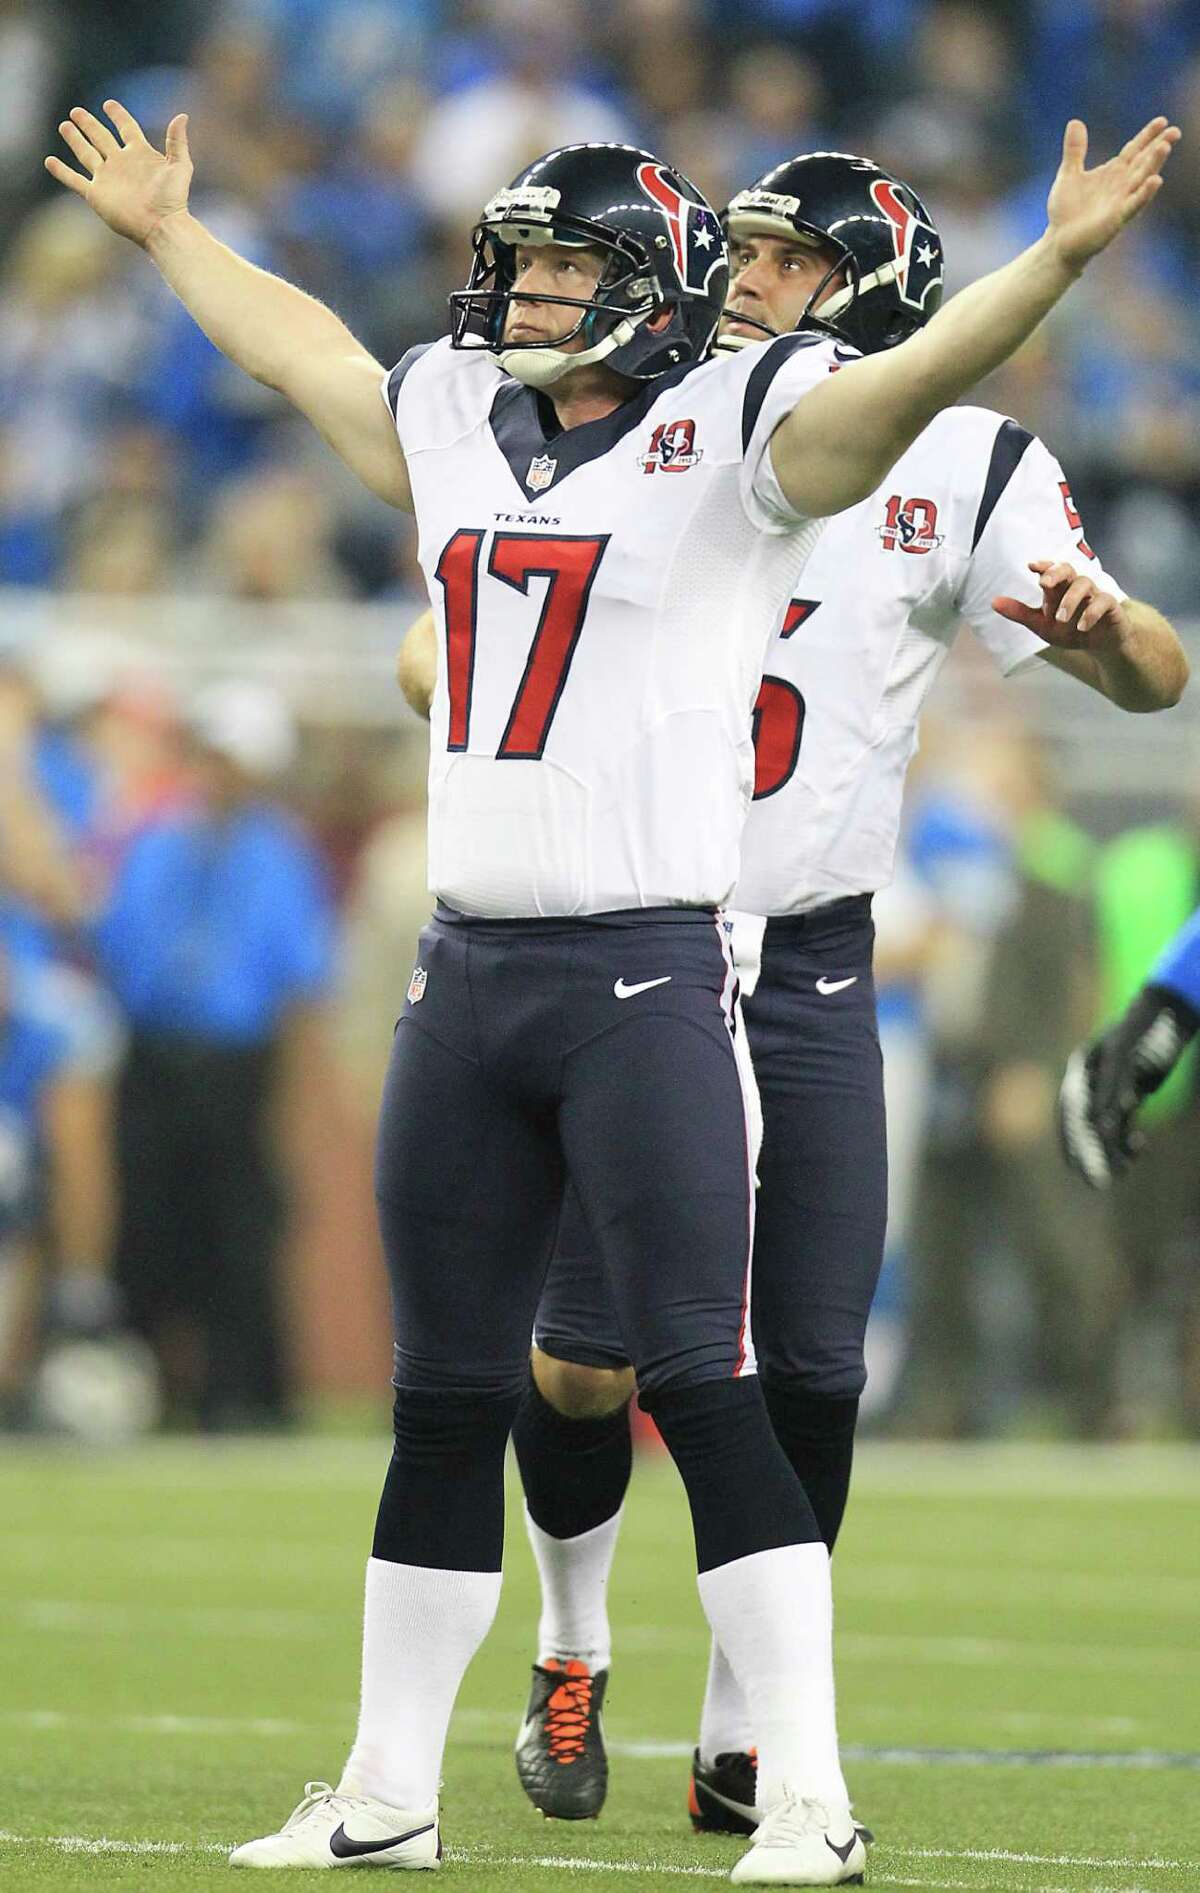 Nov. 22, 2012 Texans 34, Lions 31 OT, Ford Field On their way to a franchise-best 12-4 record, the Texans needed Shayne Graham’s 32-yard field goal in overtime to defeat the Lions. This game was memorable for several things. Justin Forsett ran for an 81-yard touchdown after his knee was down. Lions coach Jim Schwartz threw the challenge flag. He was called for unsportsmanlike conduct because the touchdown was being challenged automatically. So his flag drew the penalty that negated the replay that would have nullified the touchdown. The league changed the rule in the offseason so a coach wouldn’t be penalized if he tried to challenge a play that was automatically reviewed. Defensive tackle Ndomukong Suh kicked Matt Schaub in the groin. Schaub finished with 315 yards. Andre Johnson had eight catches for 188 yards. Arian Foster ran for 102 yards and two touchdowns in the Texans’ second-consecutive overtime victory.